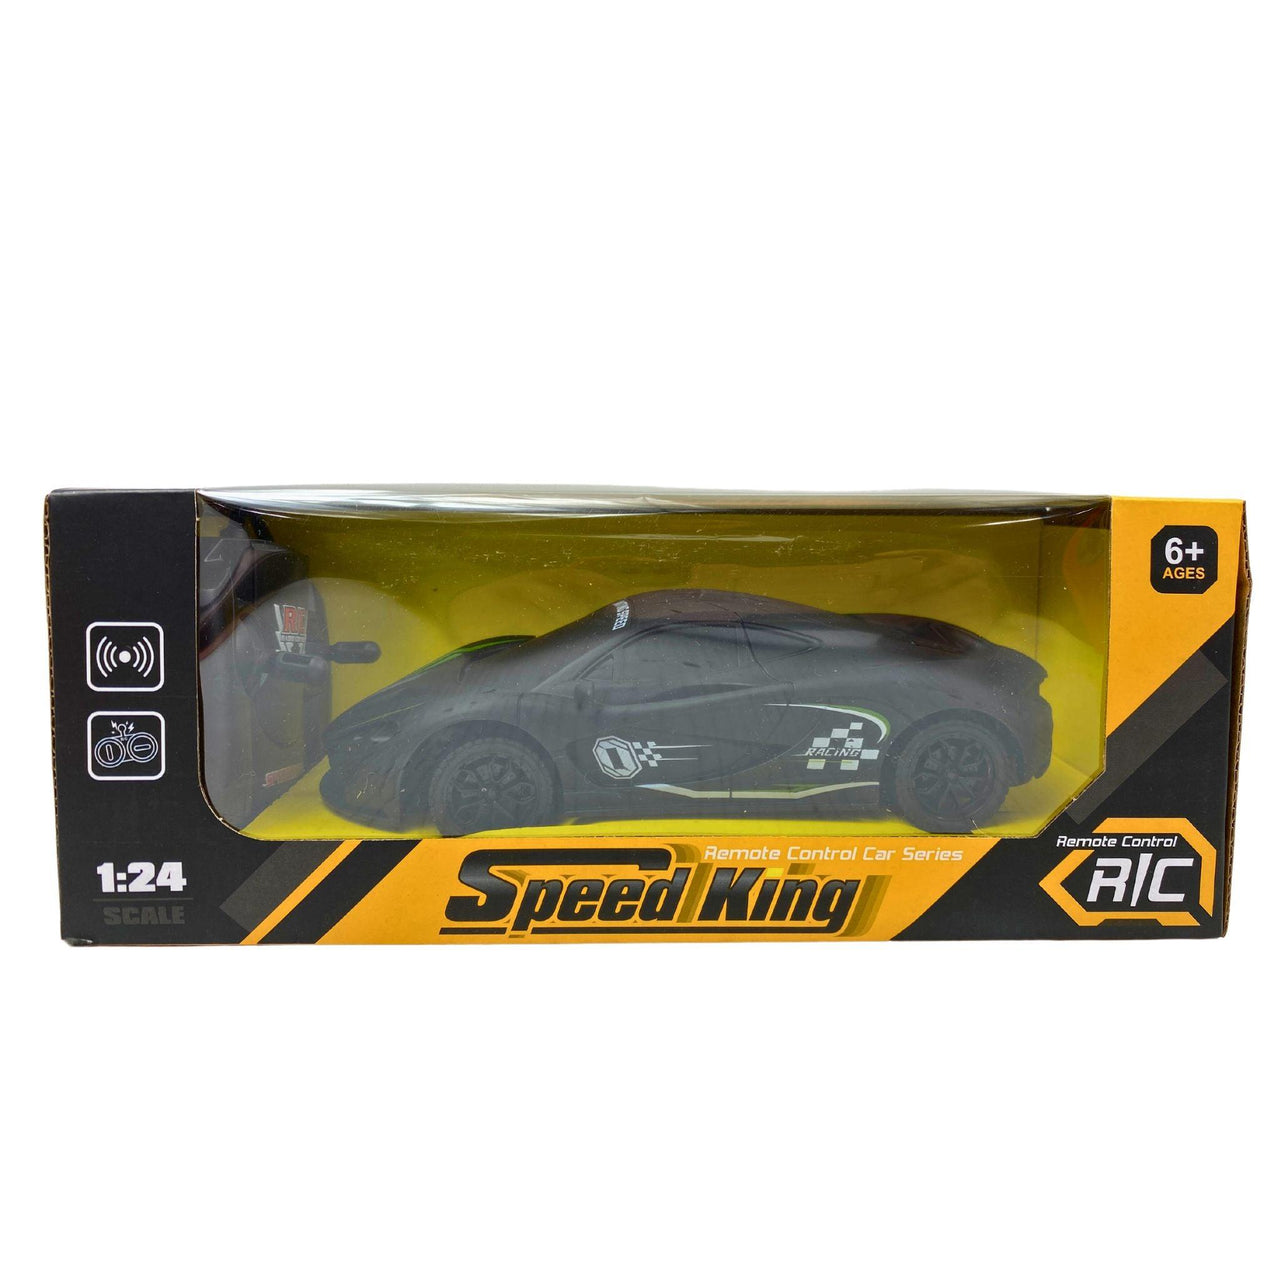 Speed King Remote Control Car Series power high speed for ages 6+ 1:24 Scale (40 Pcs Lot) - Discount Wholesalers Inc